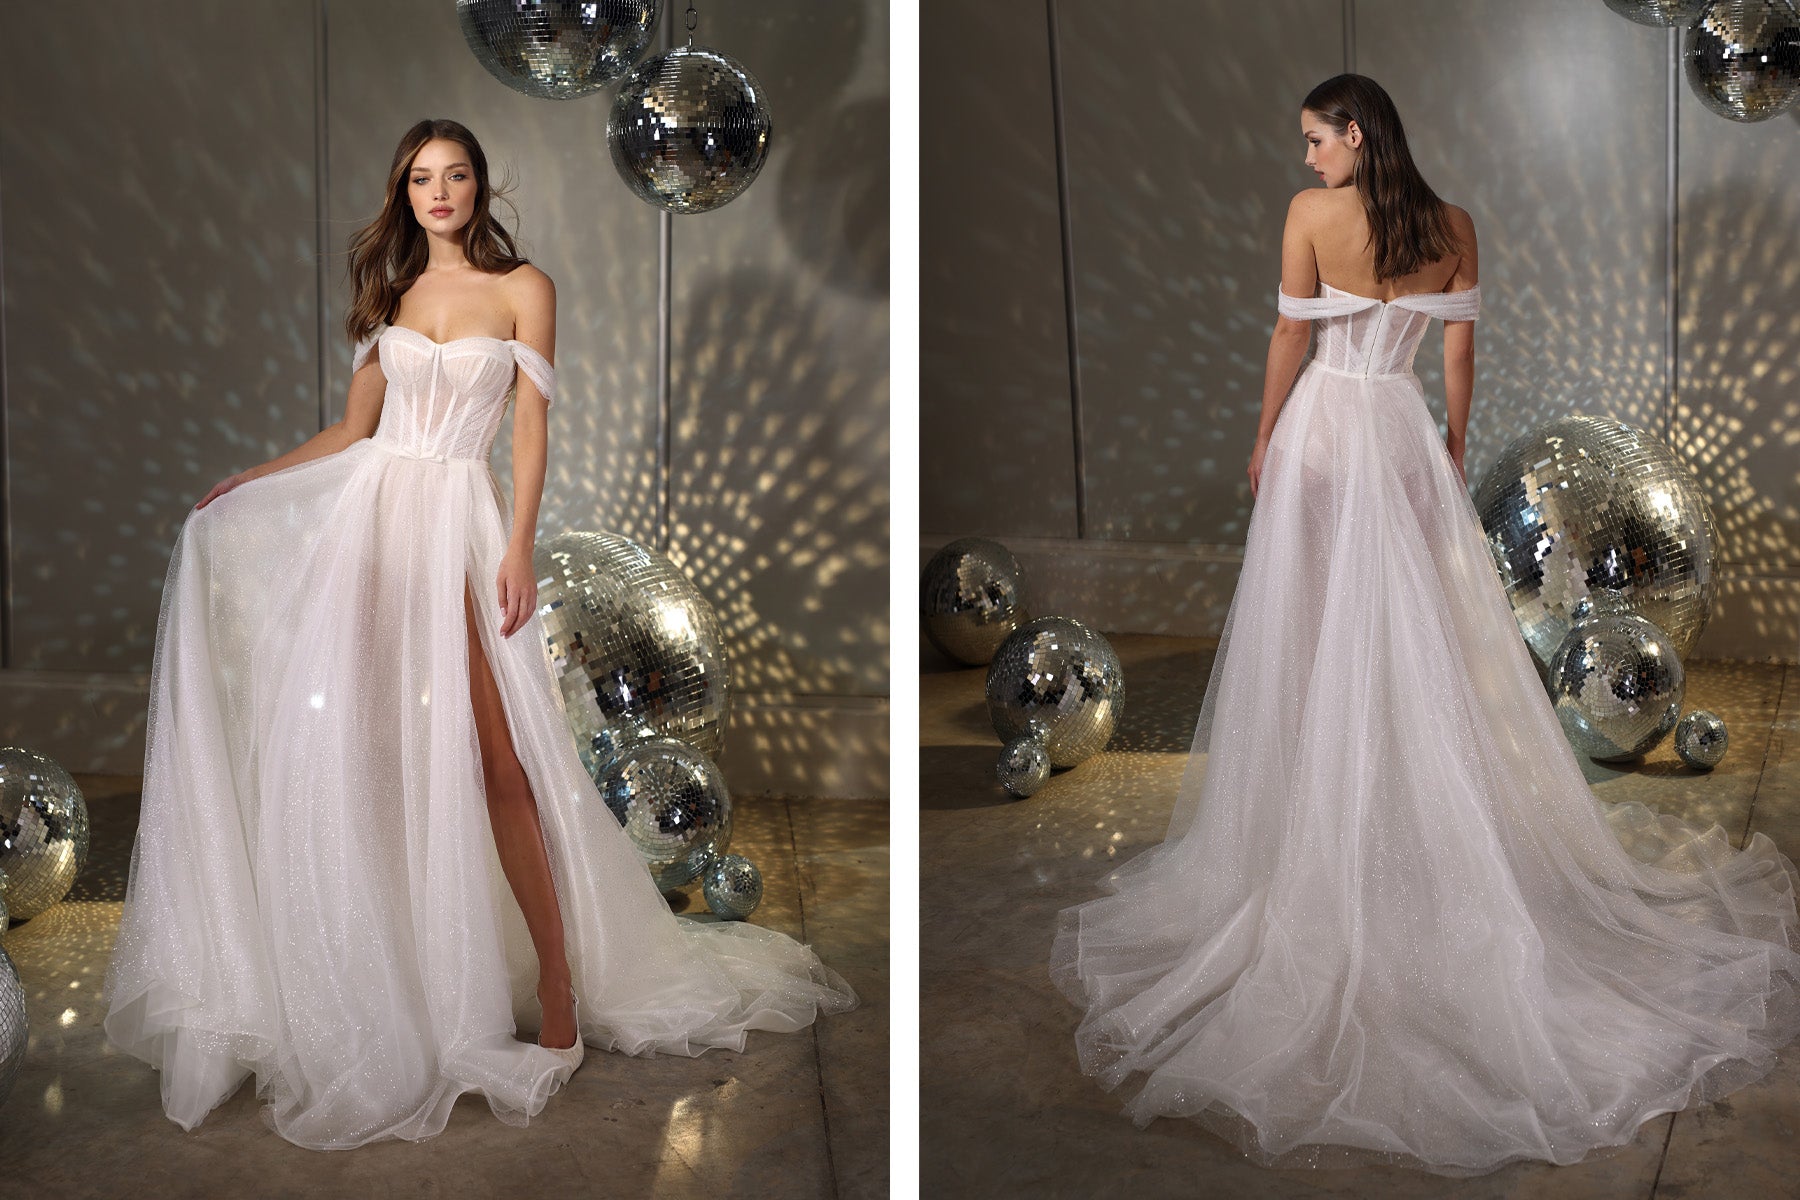 The 'Igbalode' Bridal Collection Brings a Modern Flair To